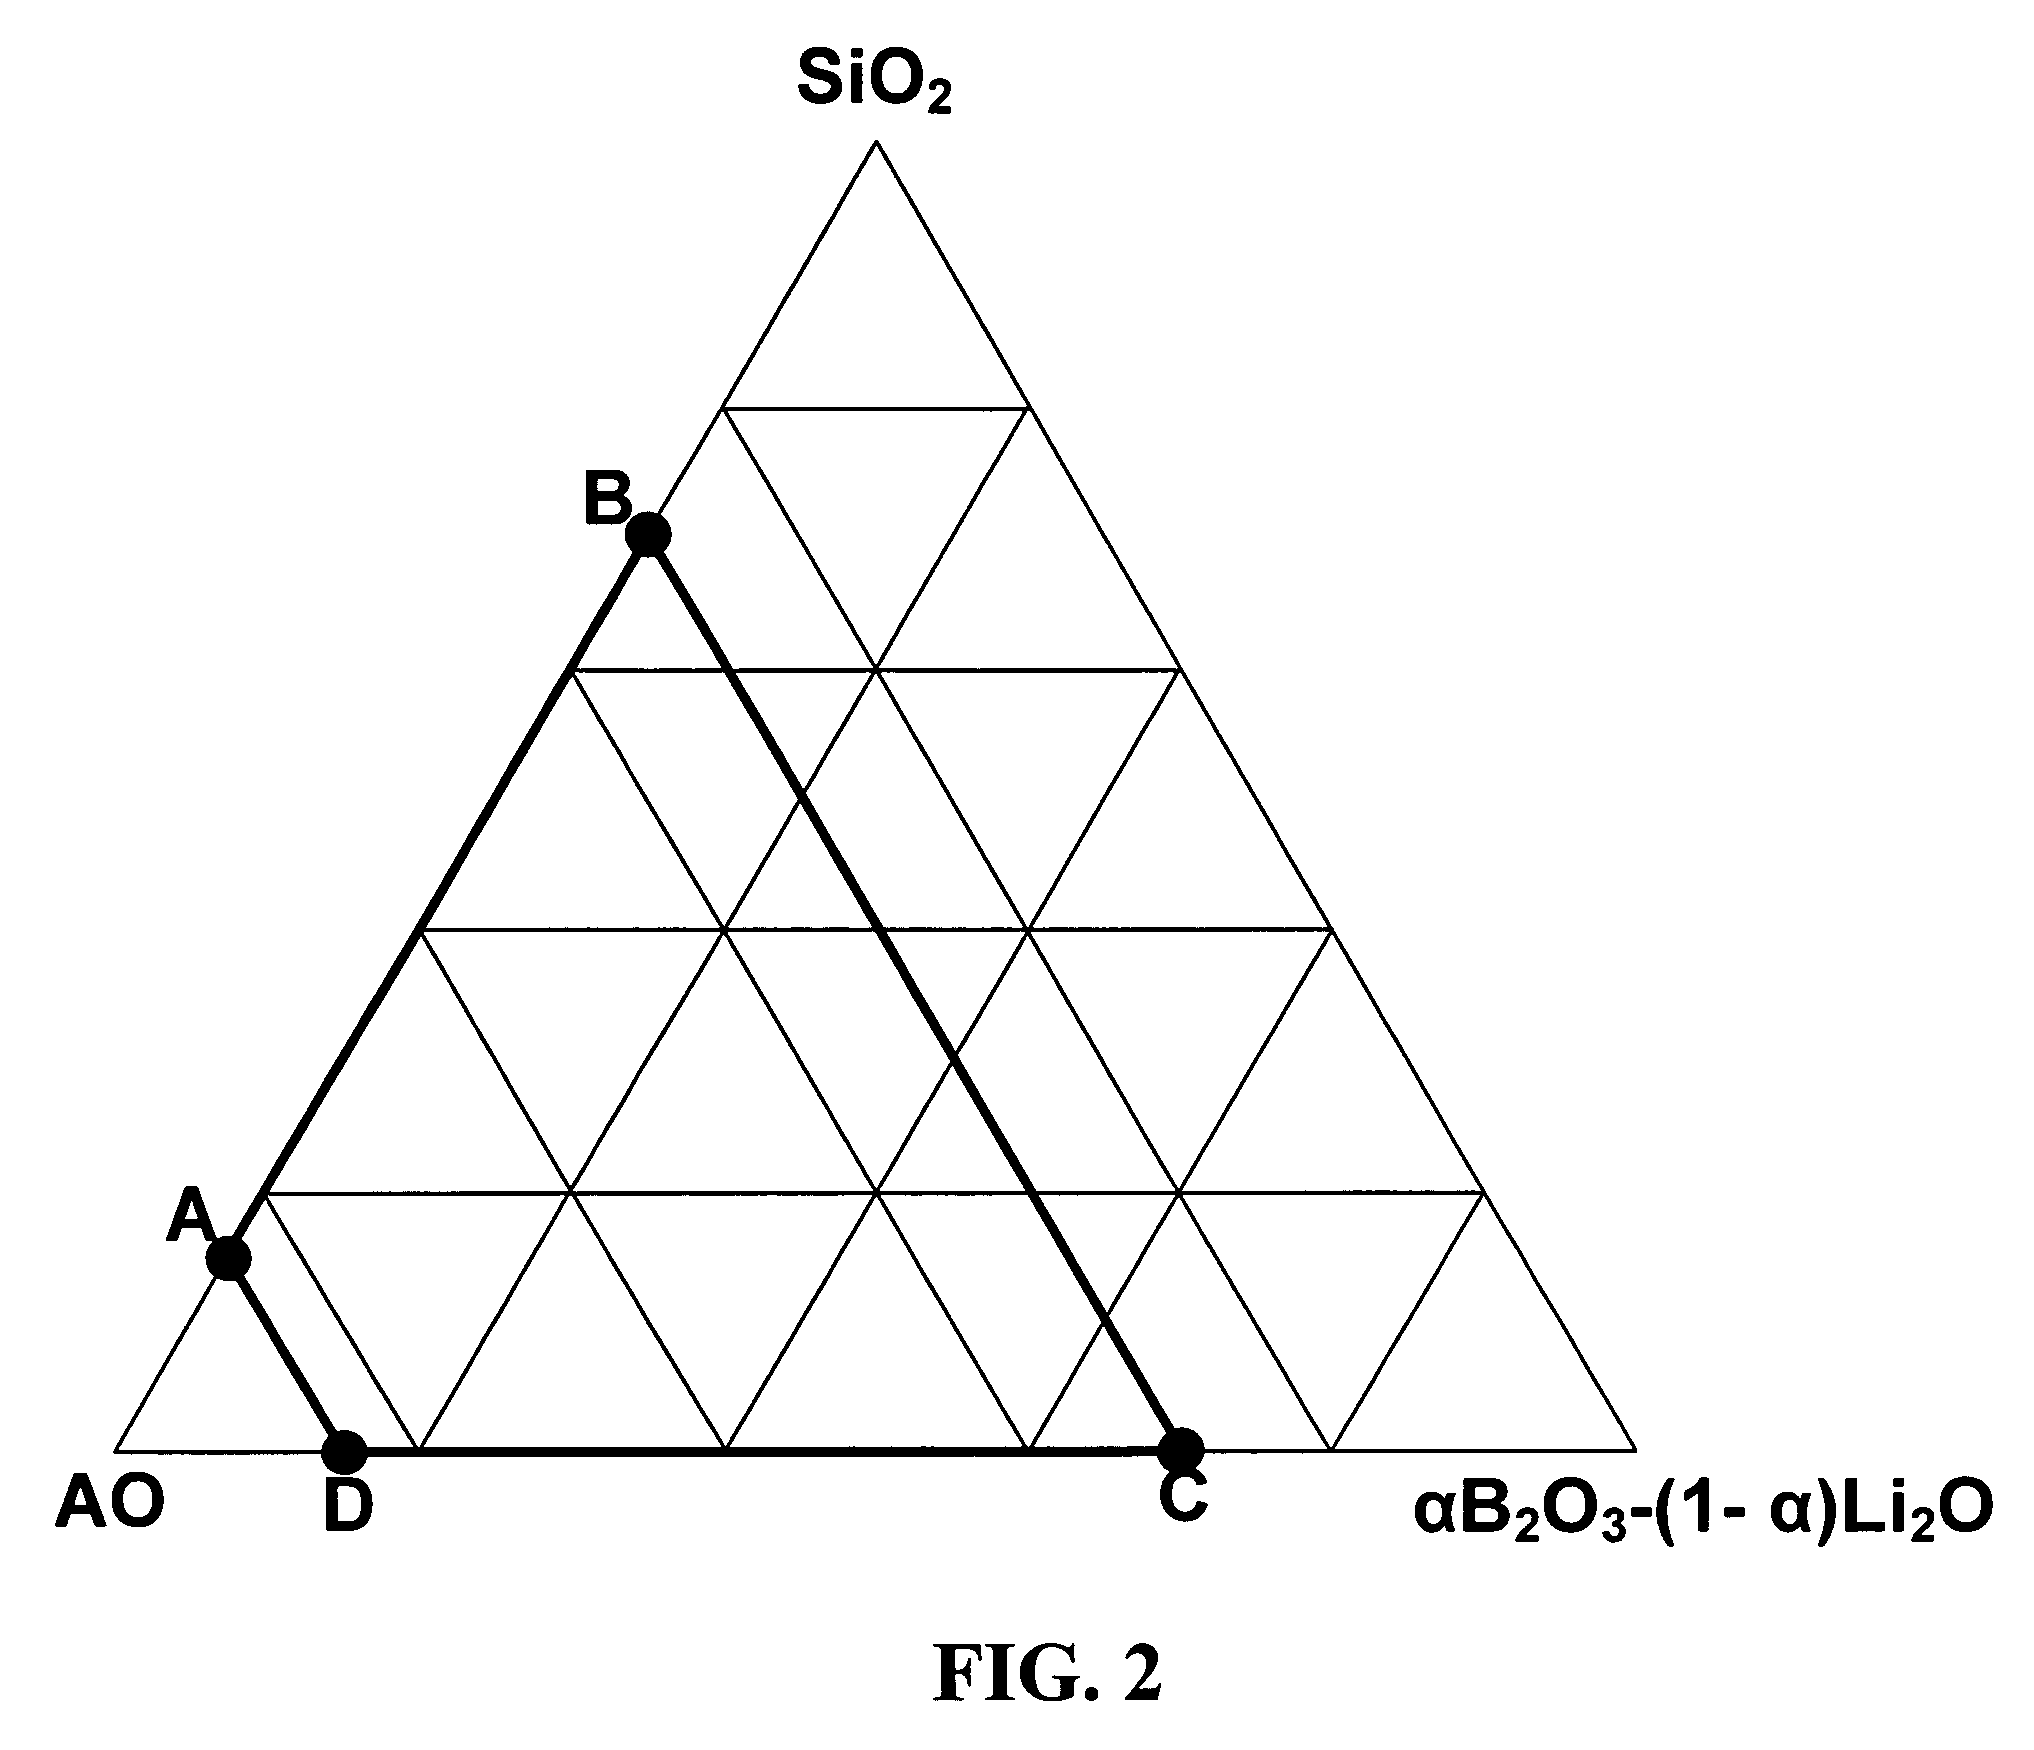 Dielectric ceramic capacitor comprising non-reducible dielectric